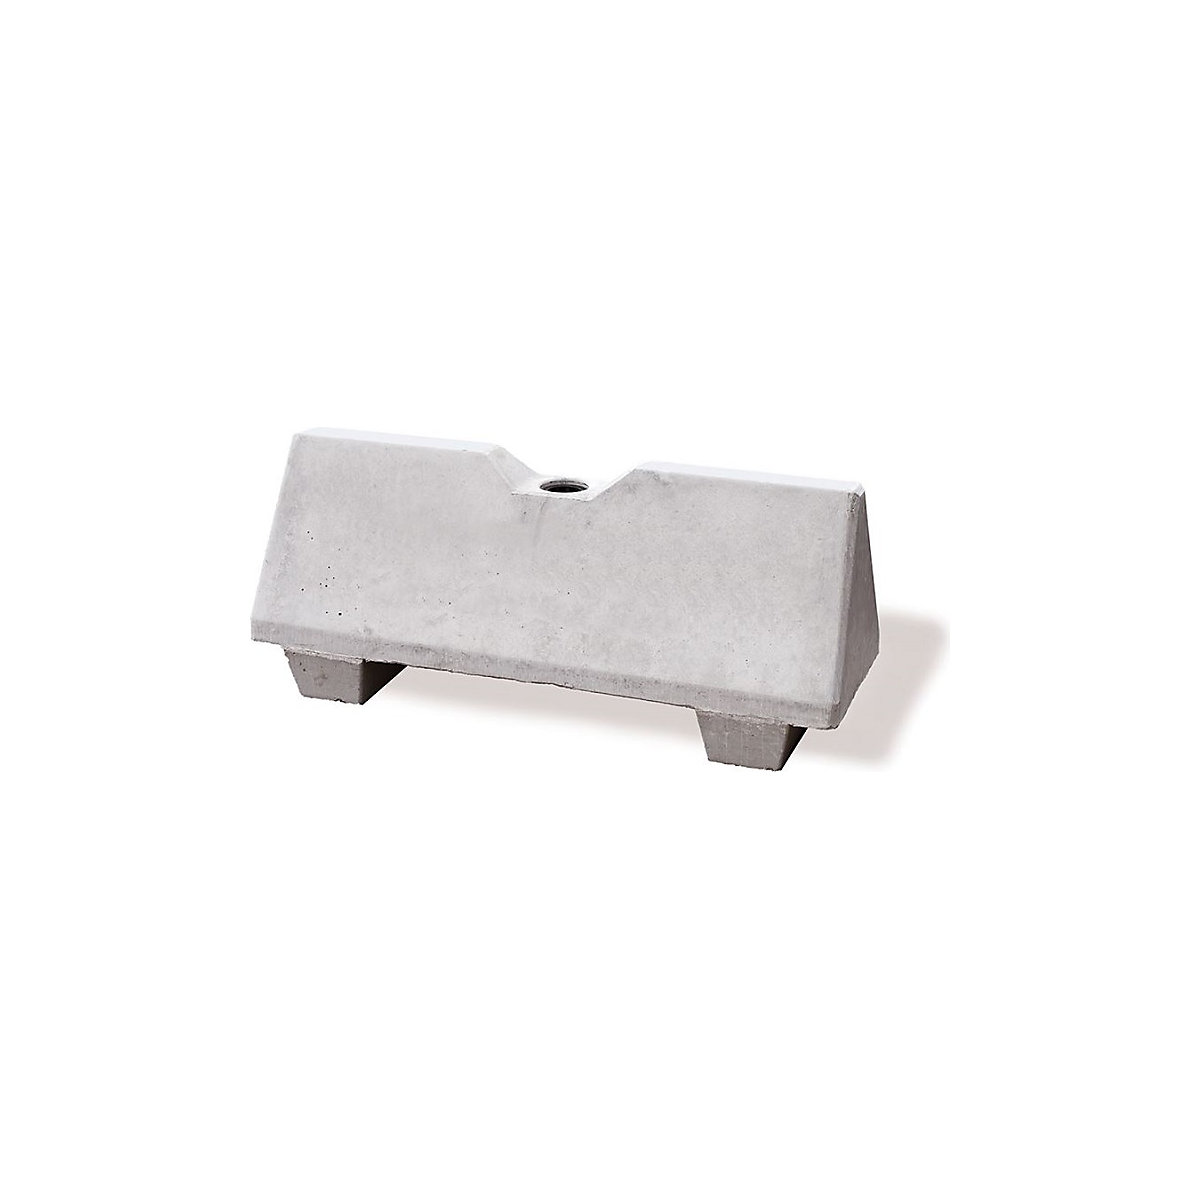 Concrete barrier, LxWxH 1090 x 390 x 465 mm, pack of 2, grey, with hole-2